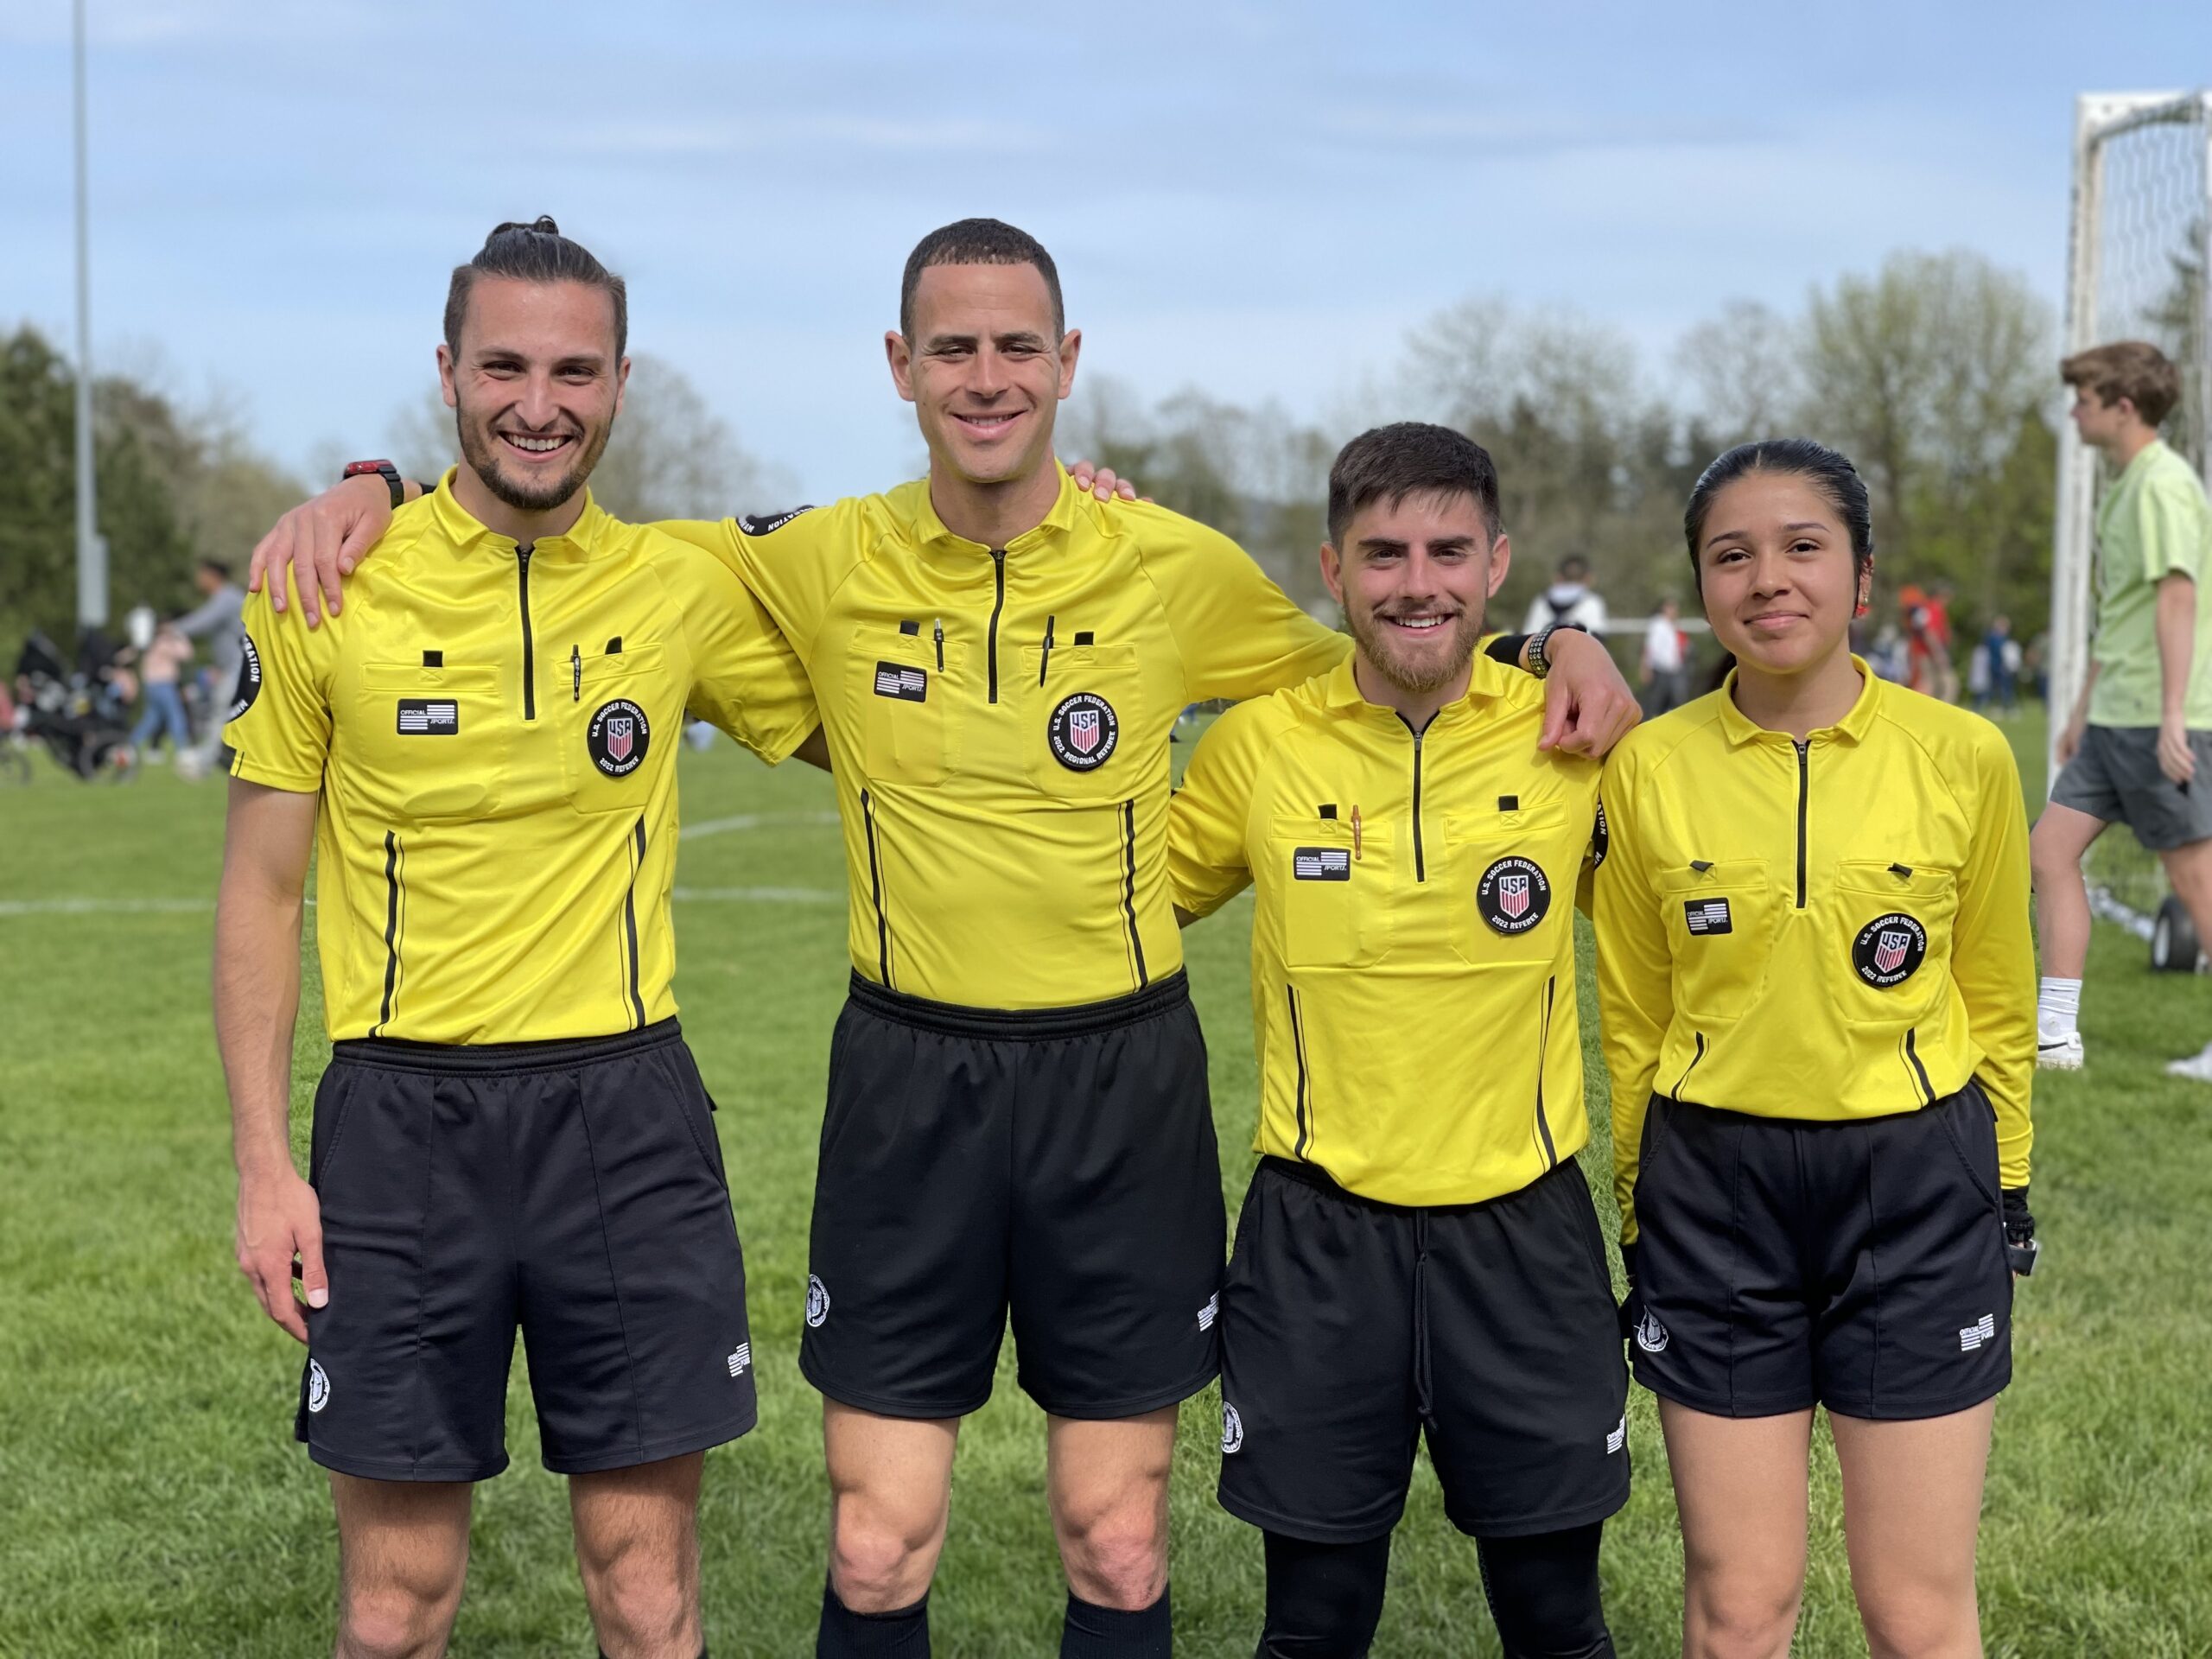 Four referees in yellow smiling